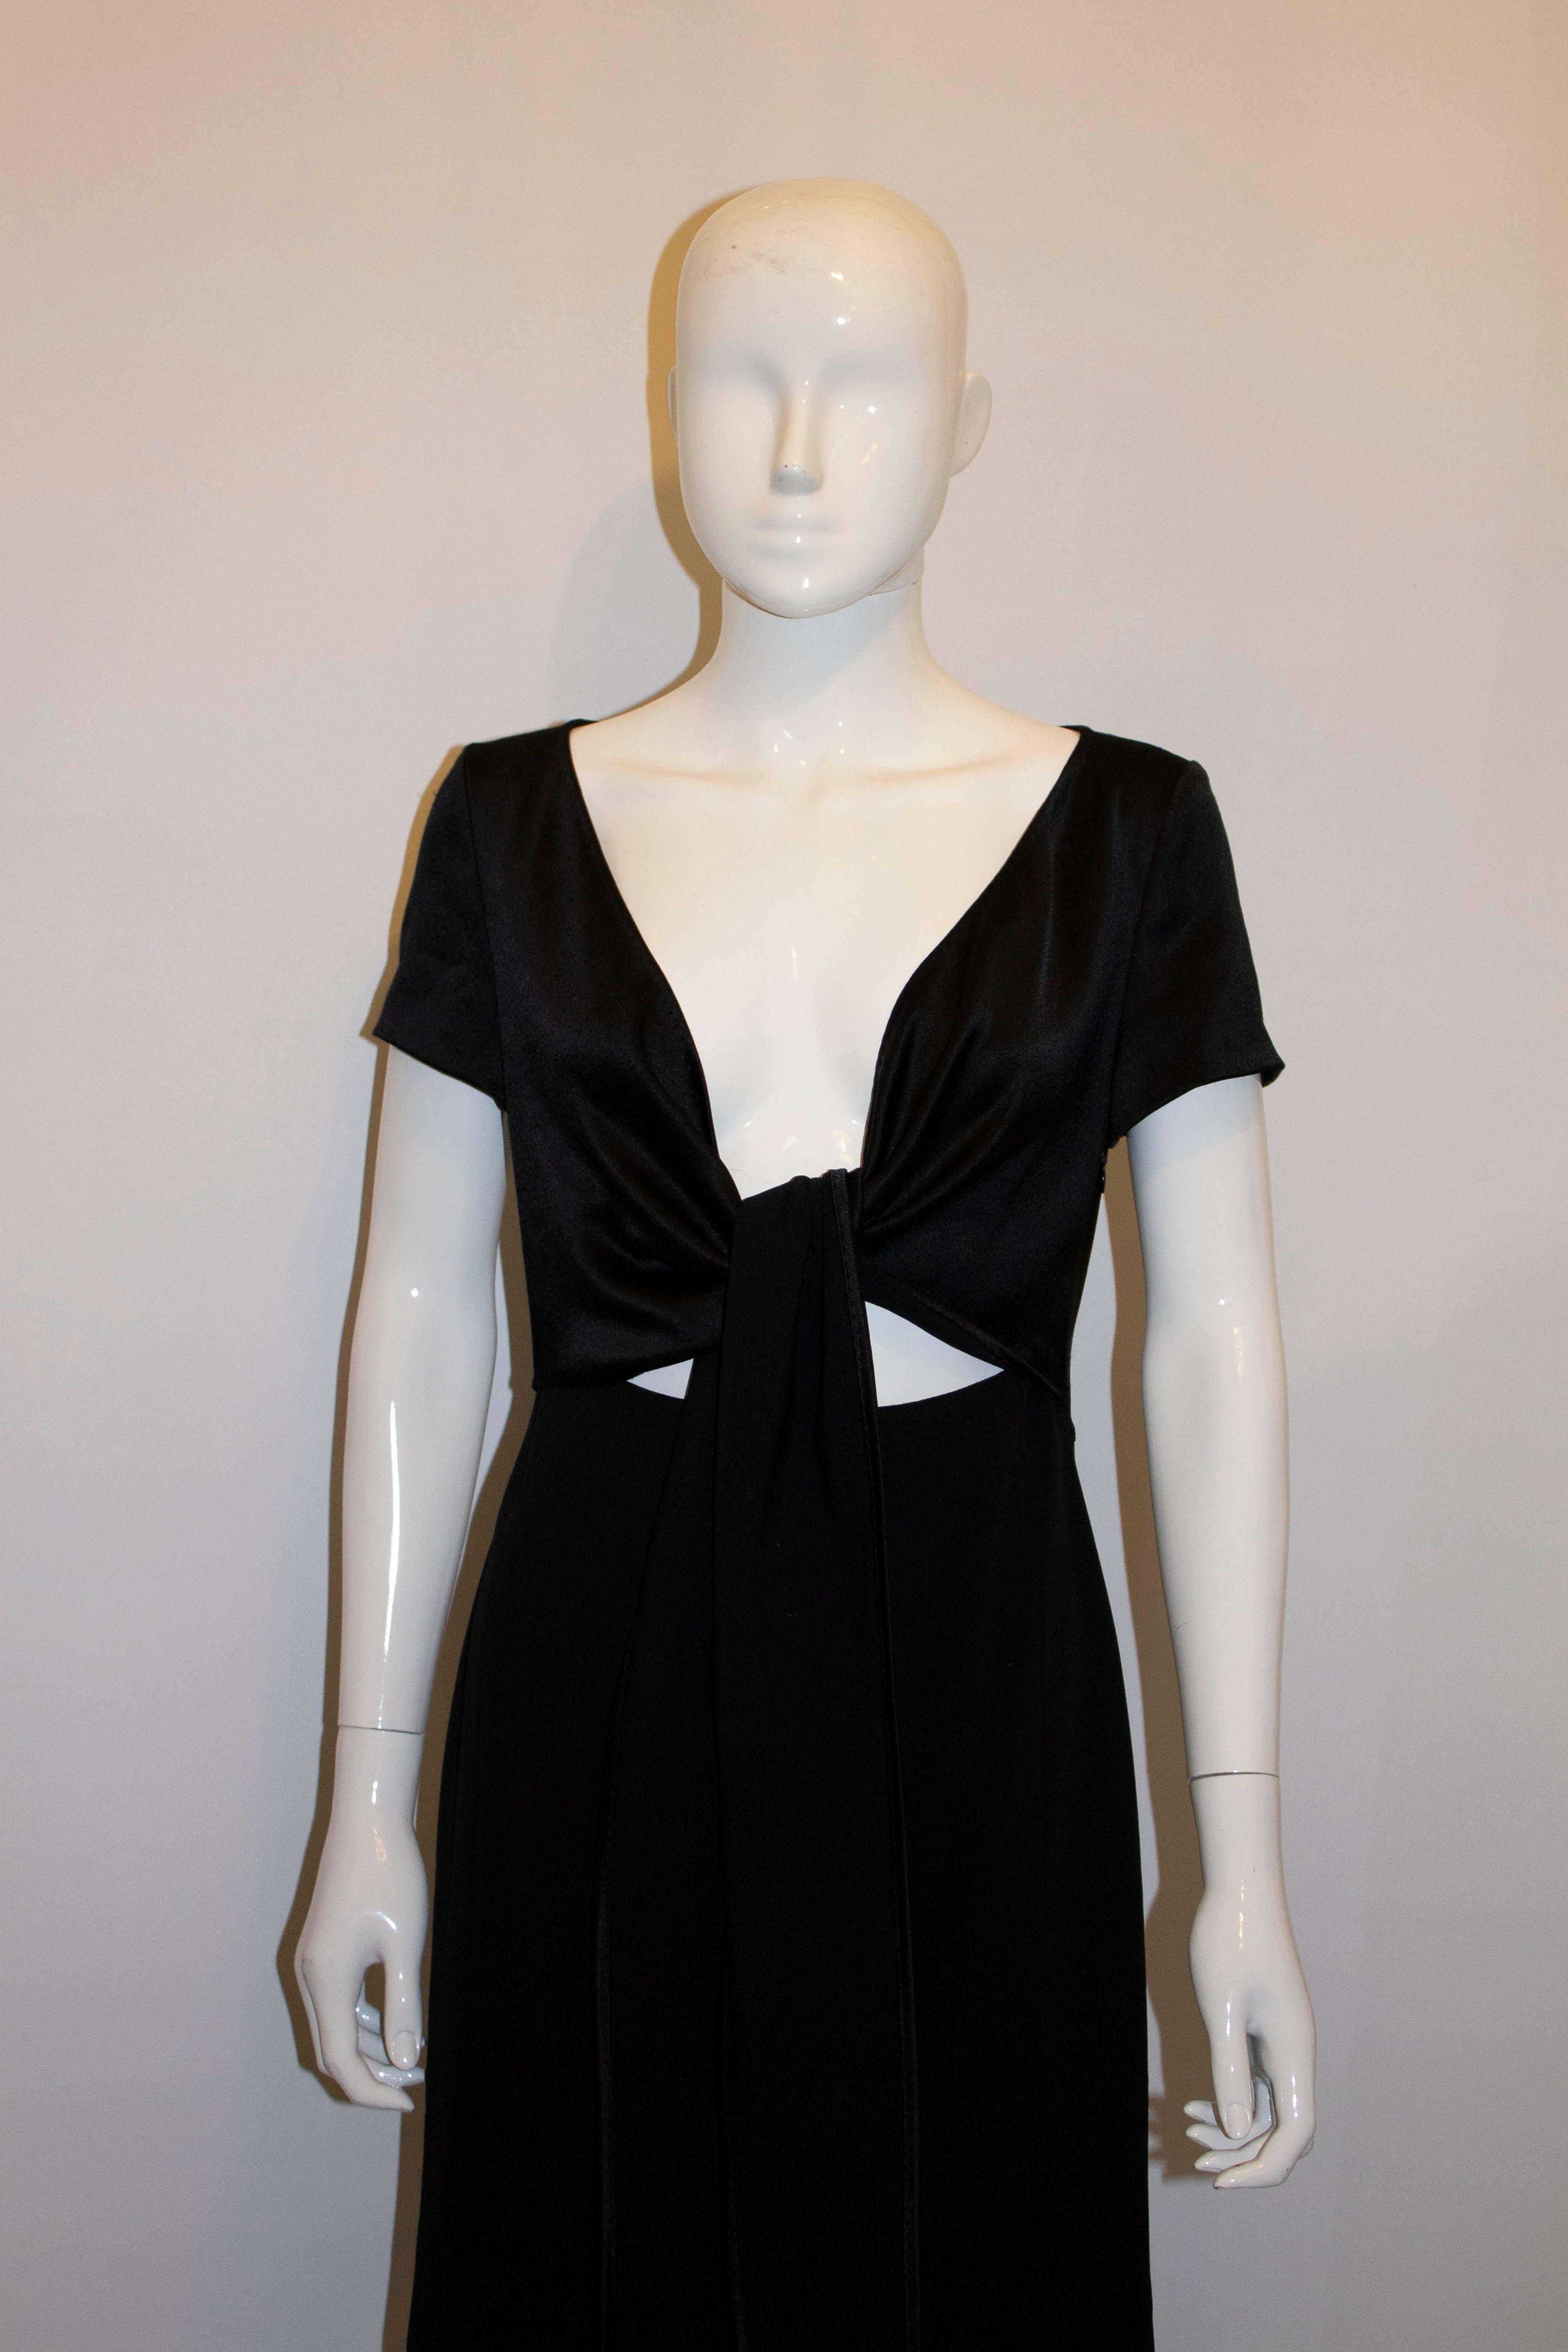 A chic black cocktail dress by Max Mara. The dress has a side zip opening, interesting tie front detail and cap sleaves. UK size 8 Measurements: Bust 34'', length 42''